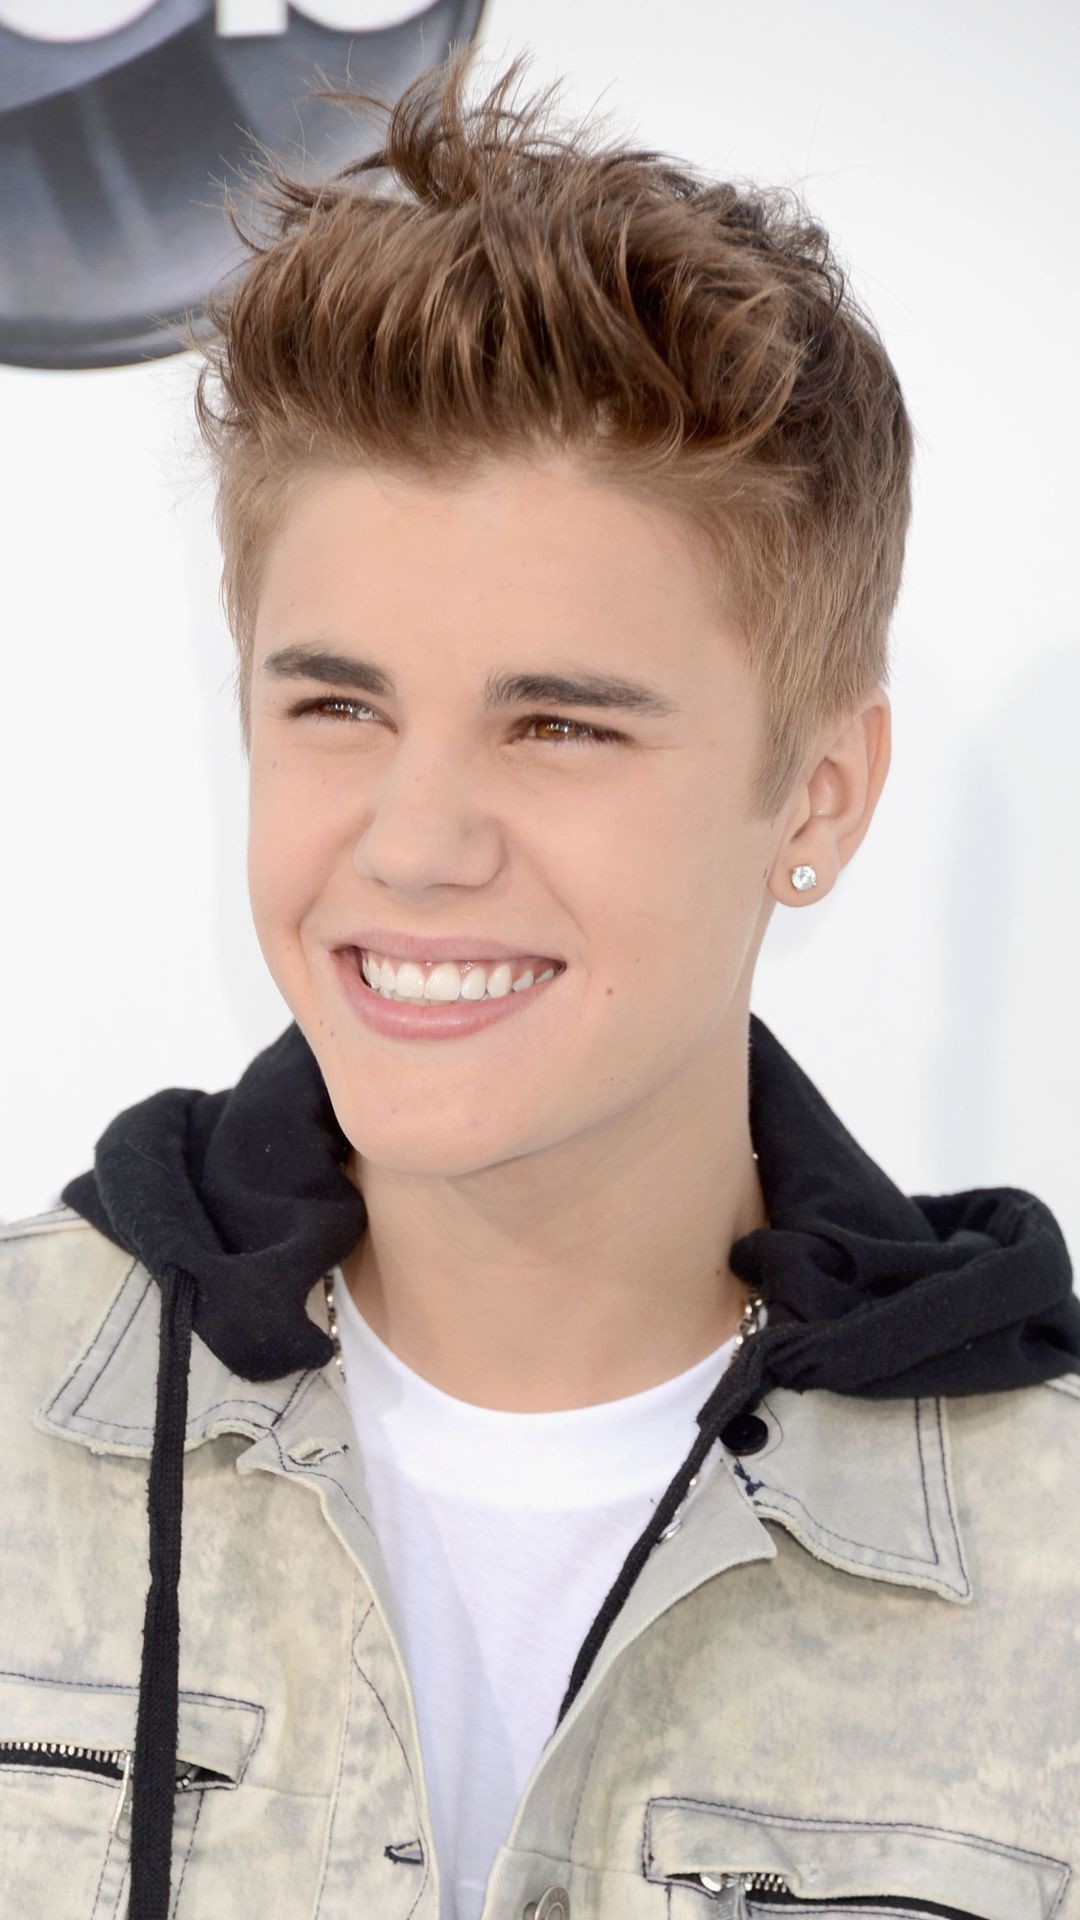 justin bieber wallpaper iphone,hair,face,hairstyle,facial expression,blond